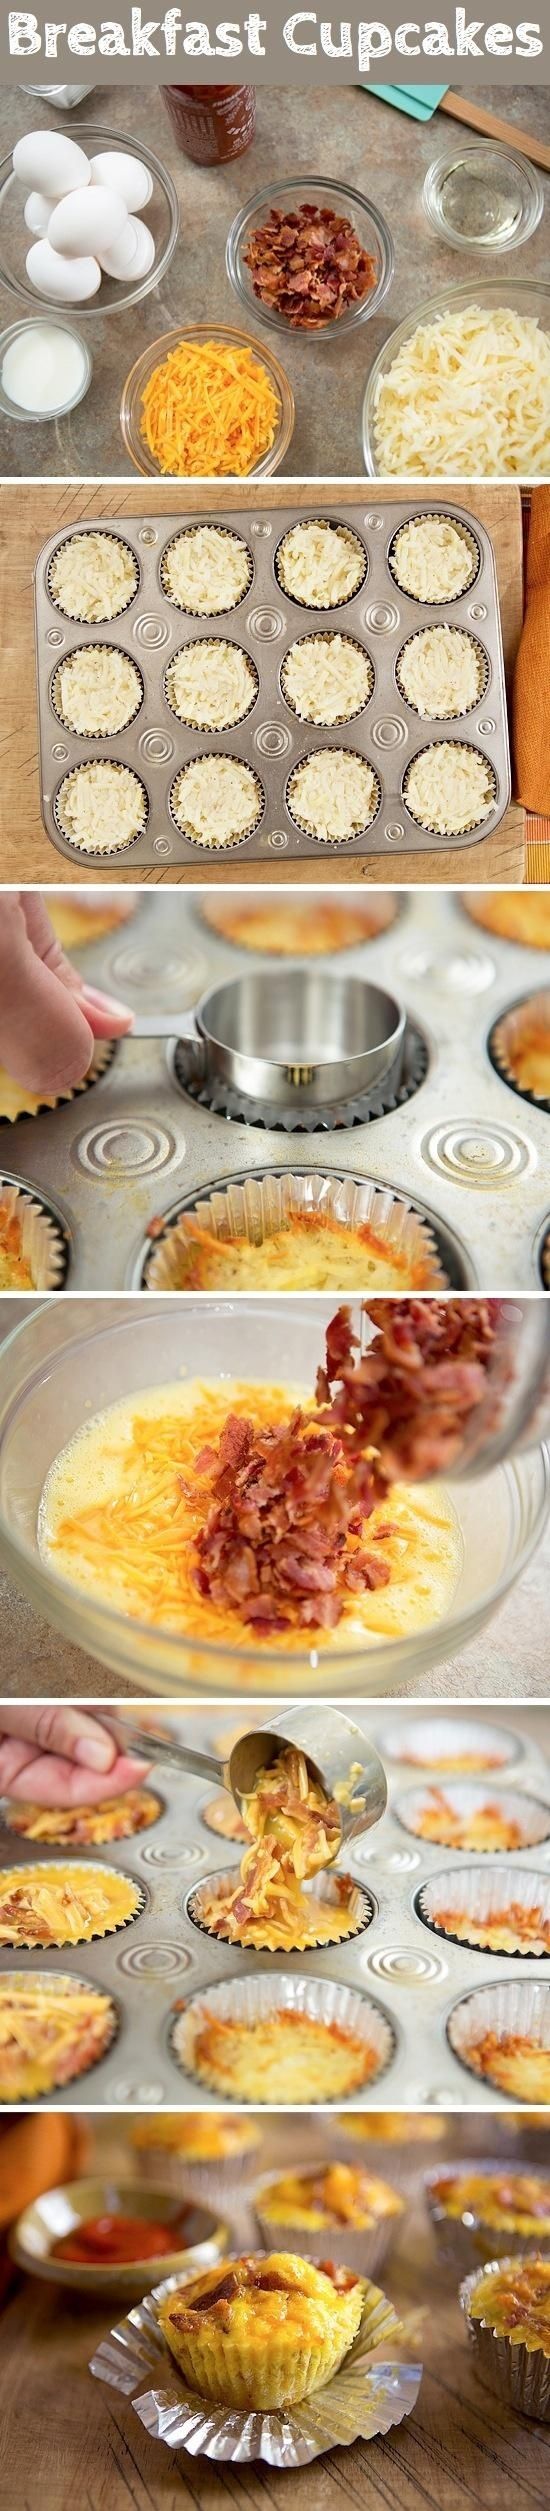 Breakfast Cupcakes–replace hashbrowns with cauliflower?